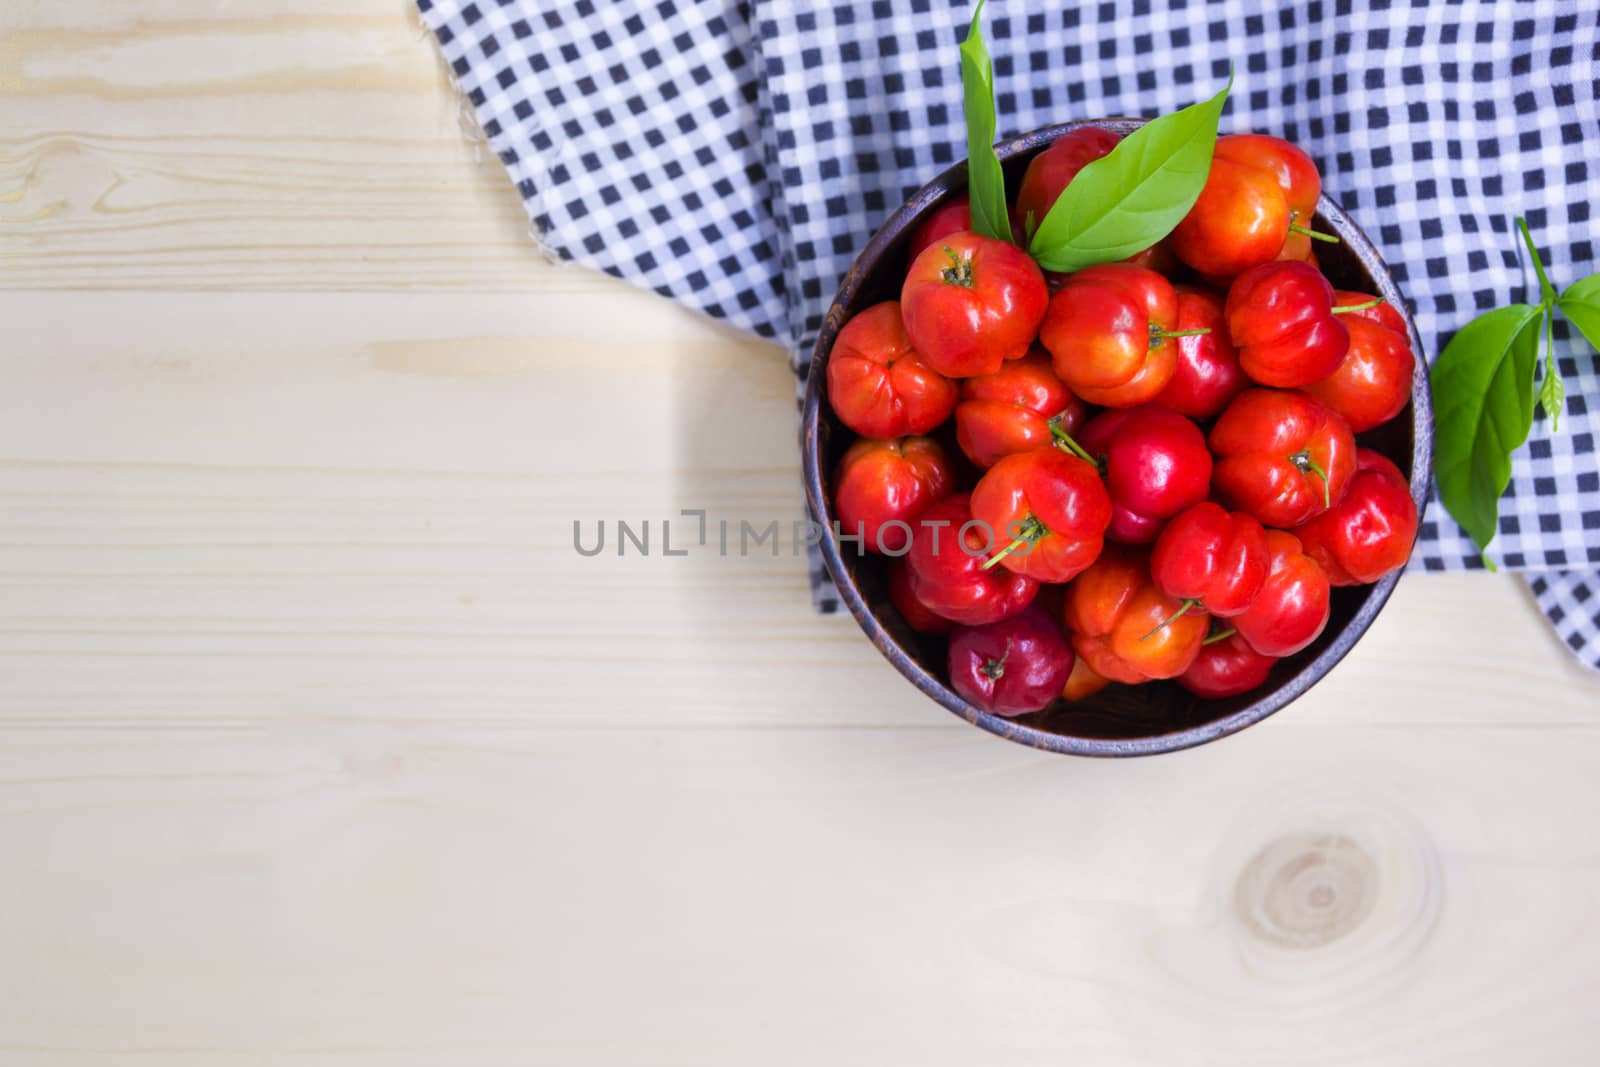 Sweet Cherry Berries In Wooden Bowl With Tartan Fabric On The Table, Red Ripe Juicy Sweet Cherry Lies On Vintage Wooden Background, Flat Lay, Top View And Copyspace For Text, Healthy Fruit Food.